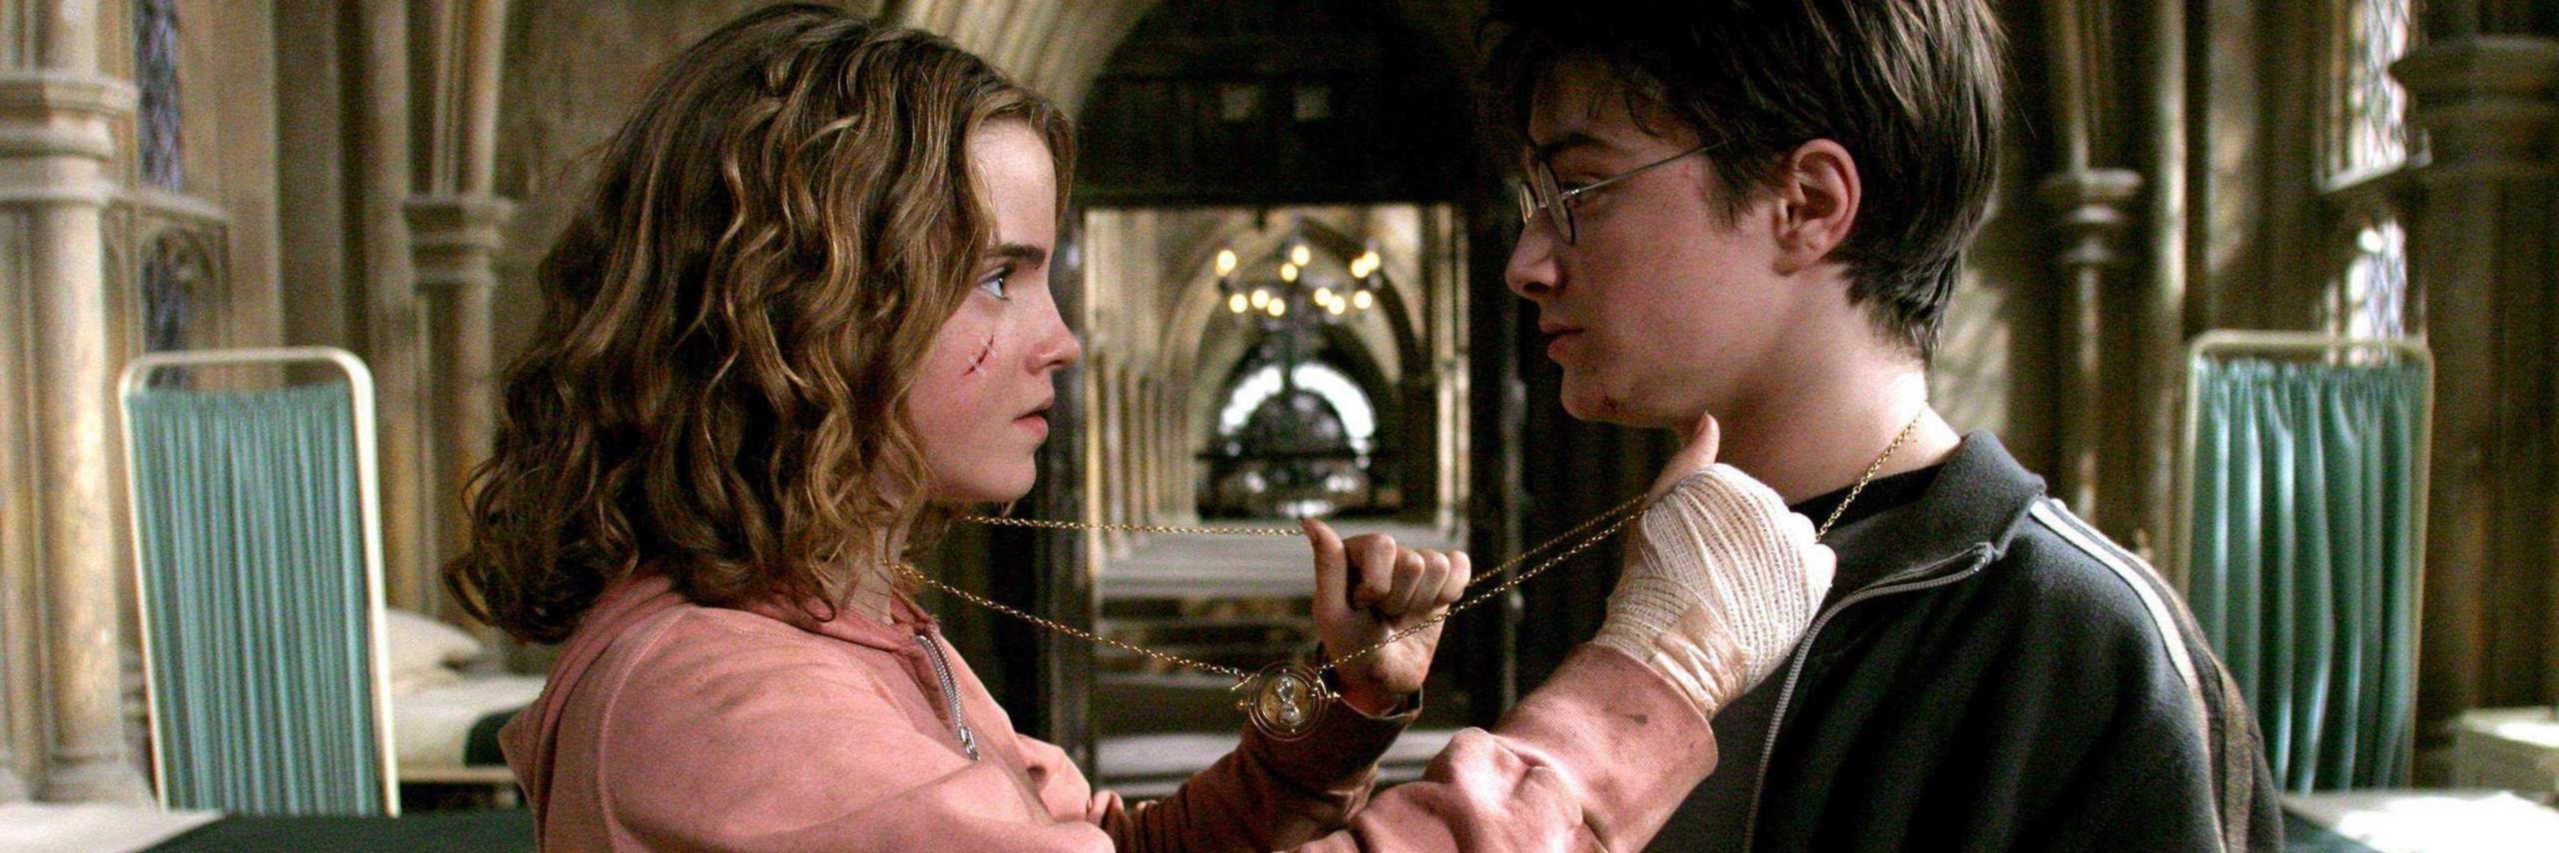 Hermione and Harry using the Time Turner in the Hospital Wing.